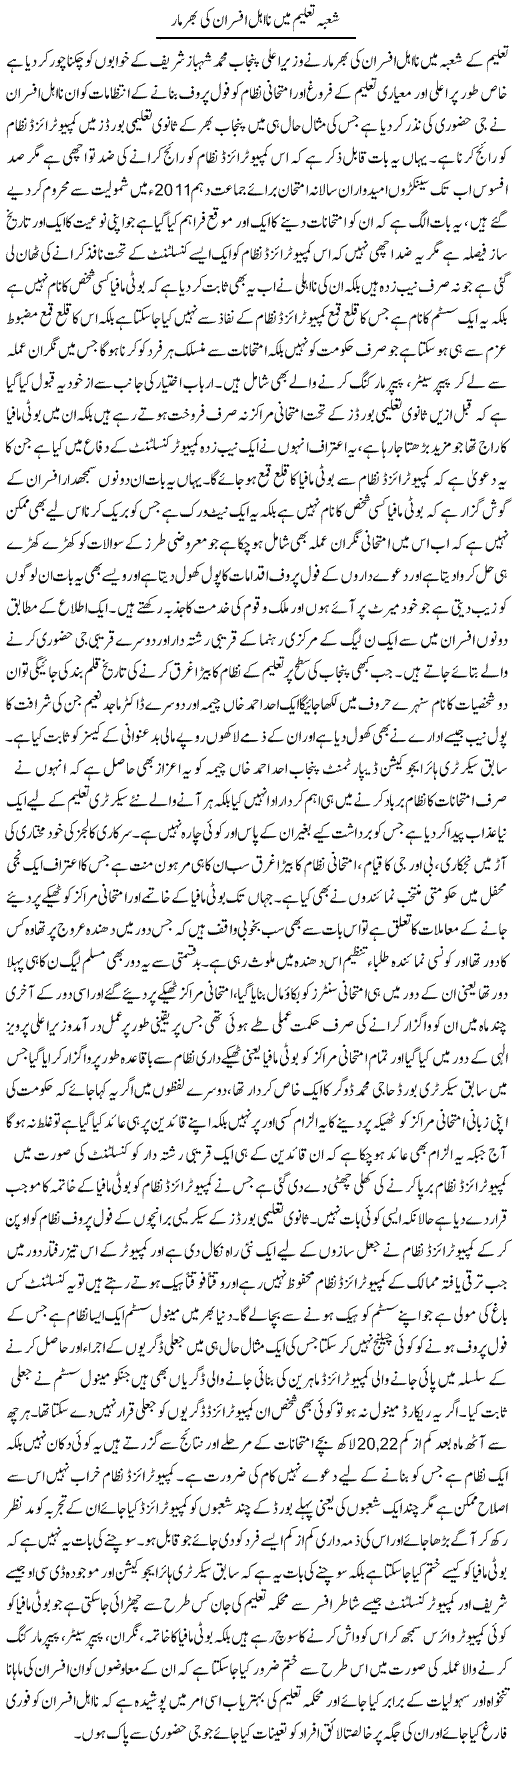 Bad Officers In Education Express Column Yousaf Abbasi 16 March 2011